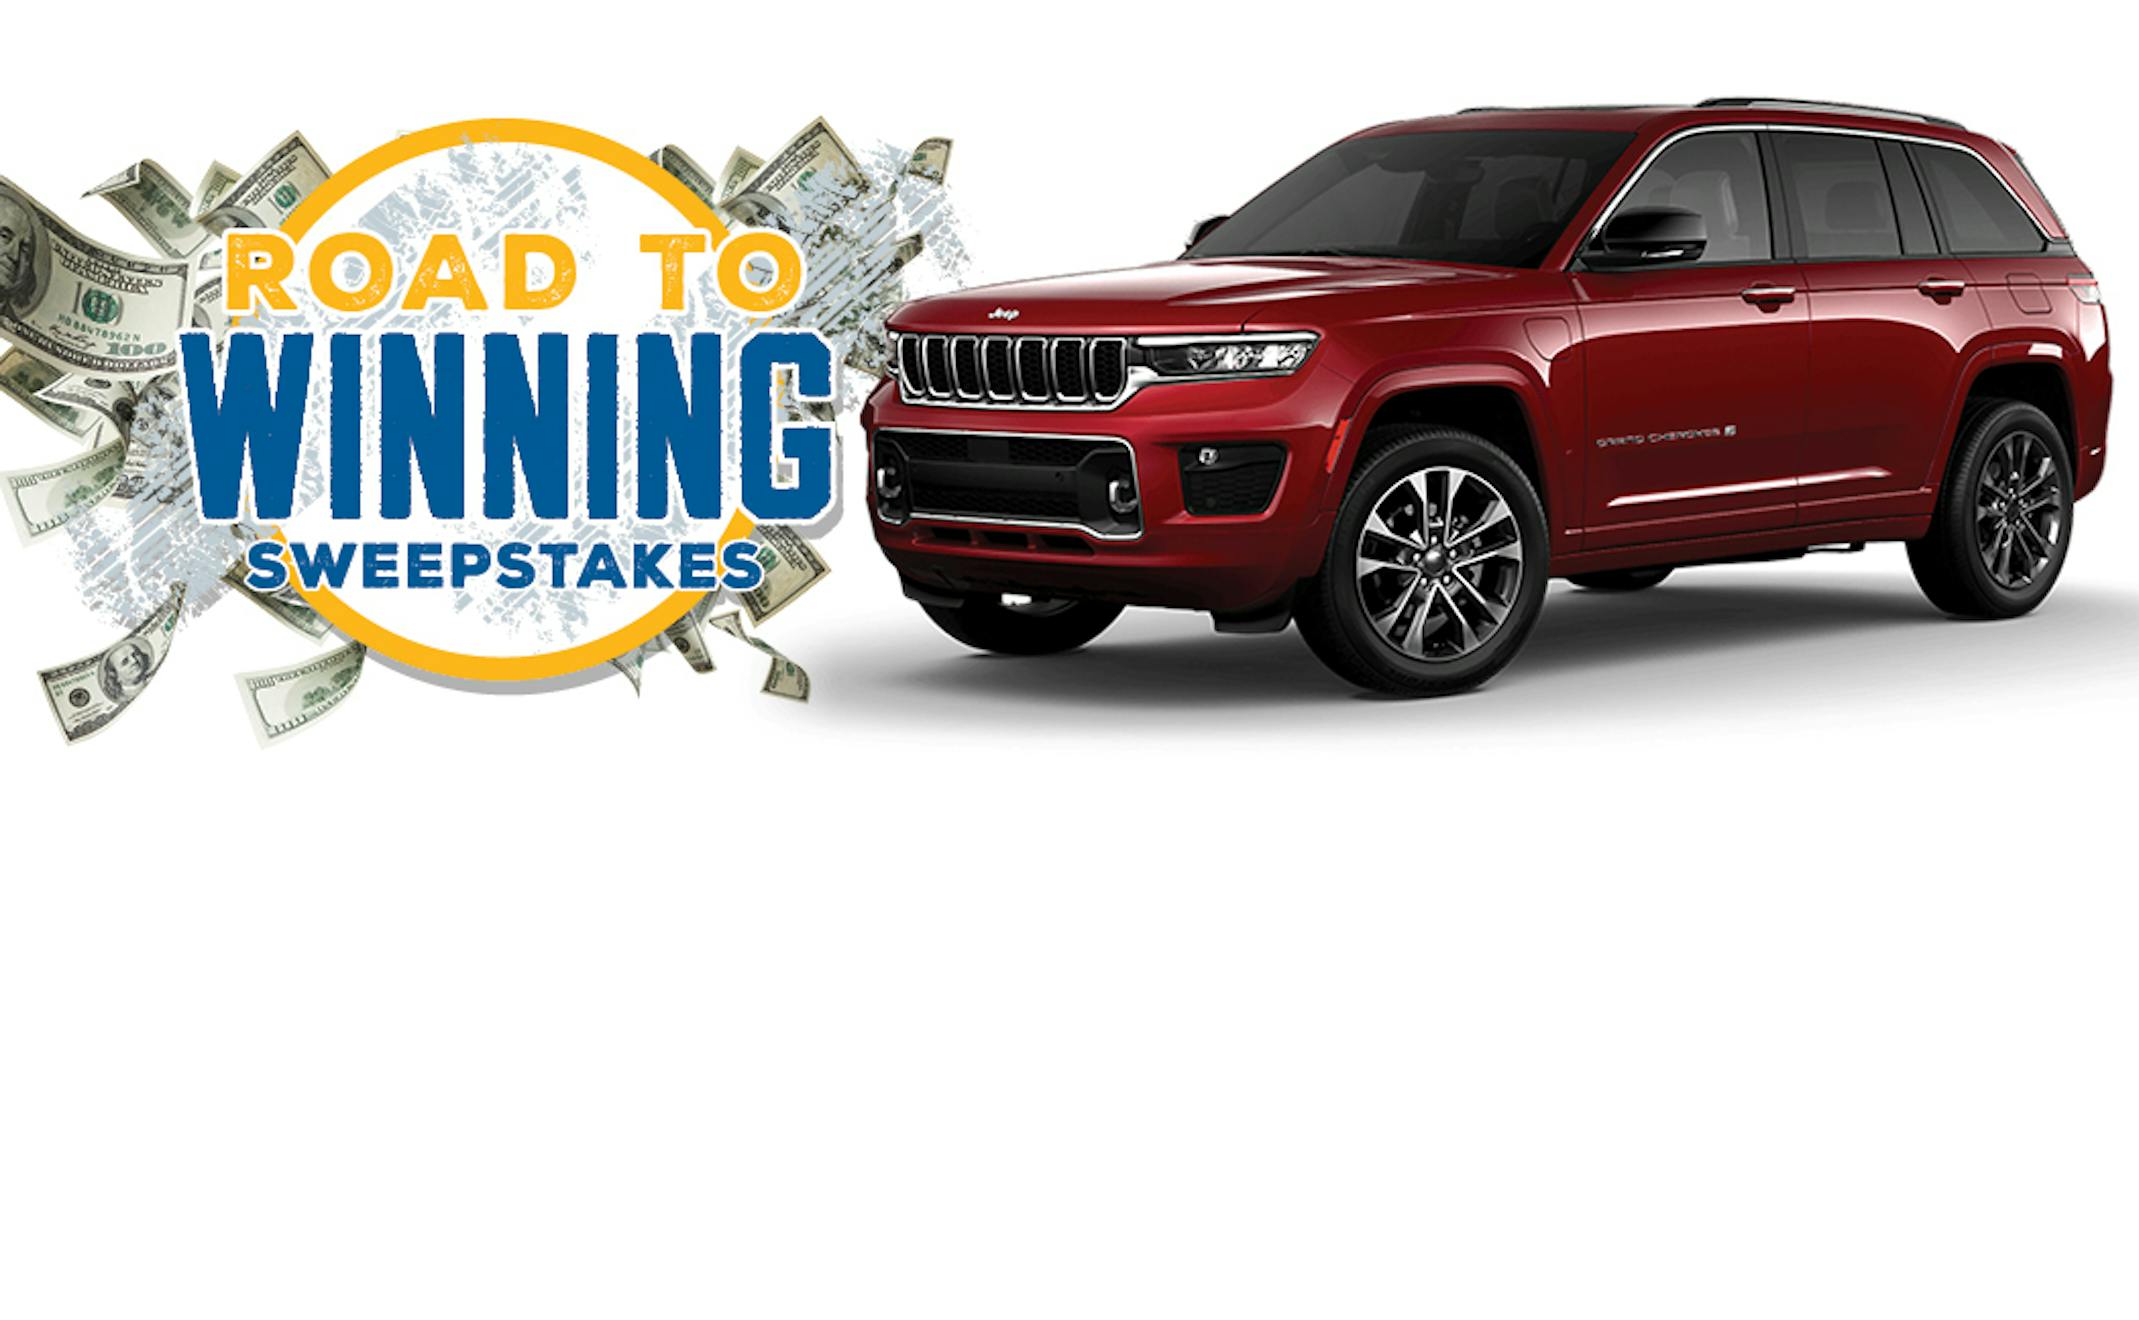 Win a car "Jeep" sweepstakes promotion - Rivers Casino Philadelphia